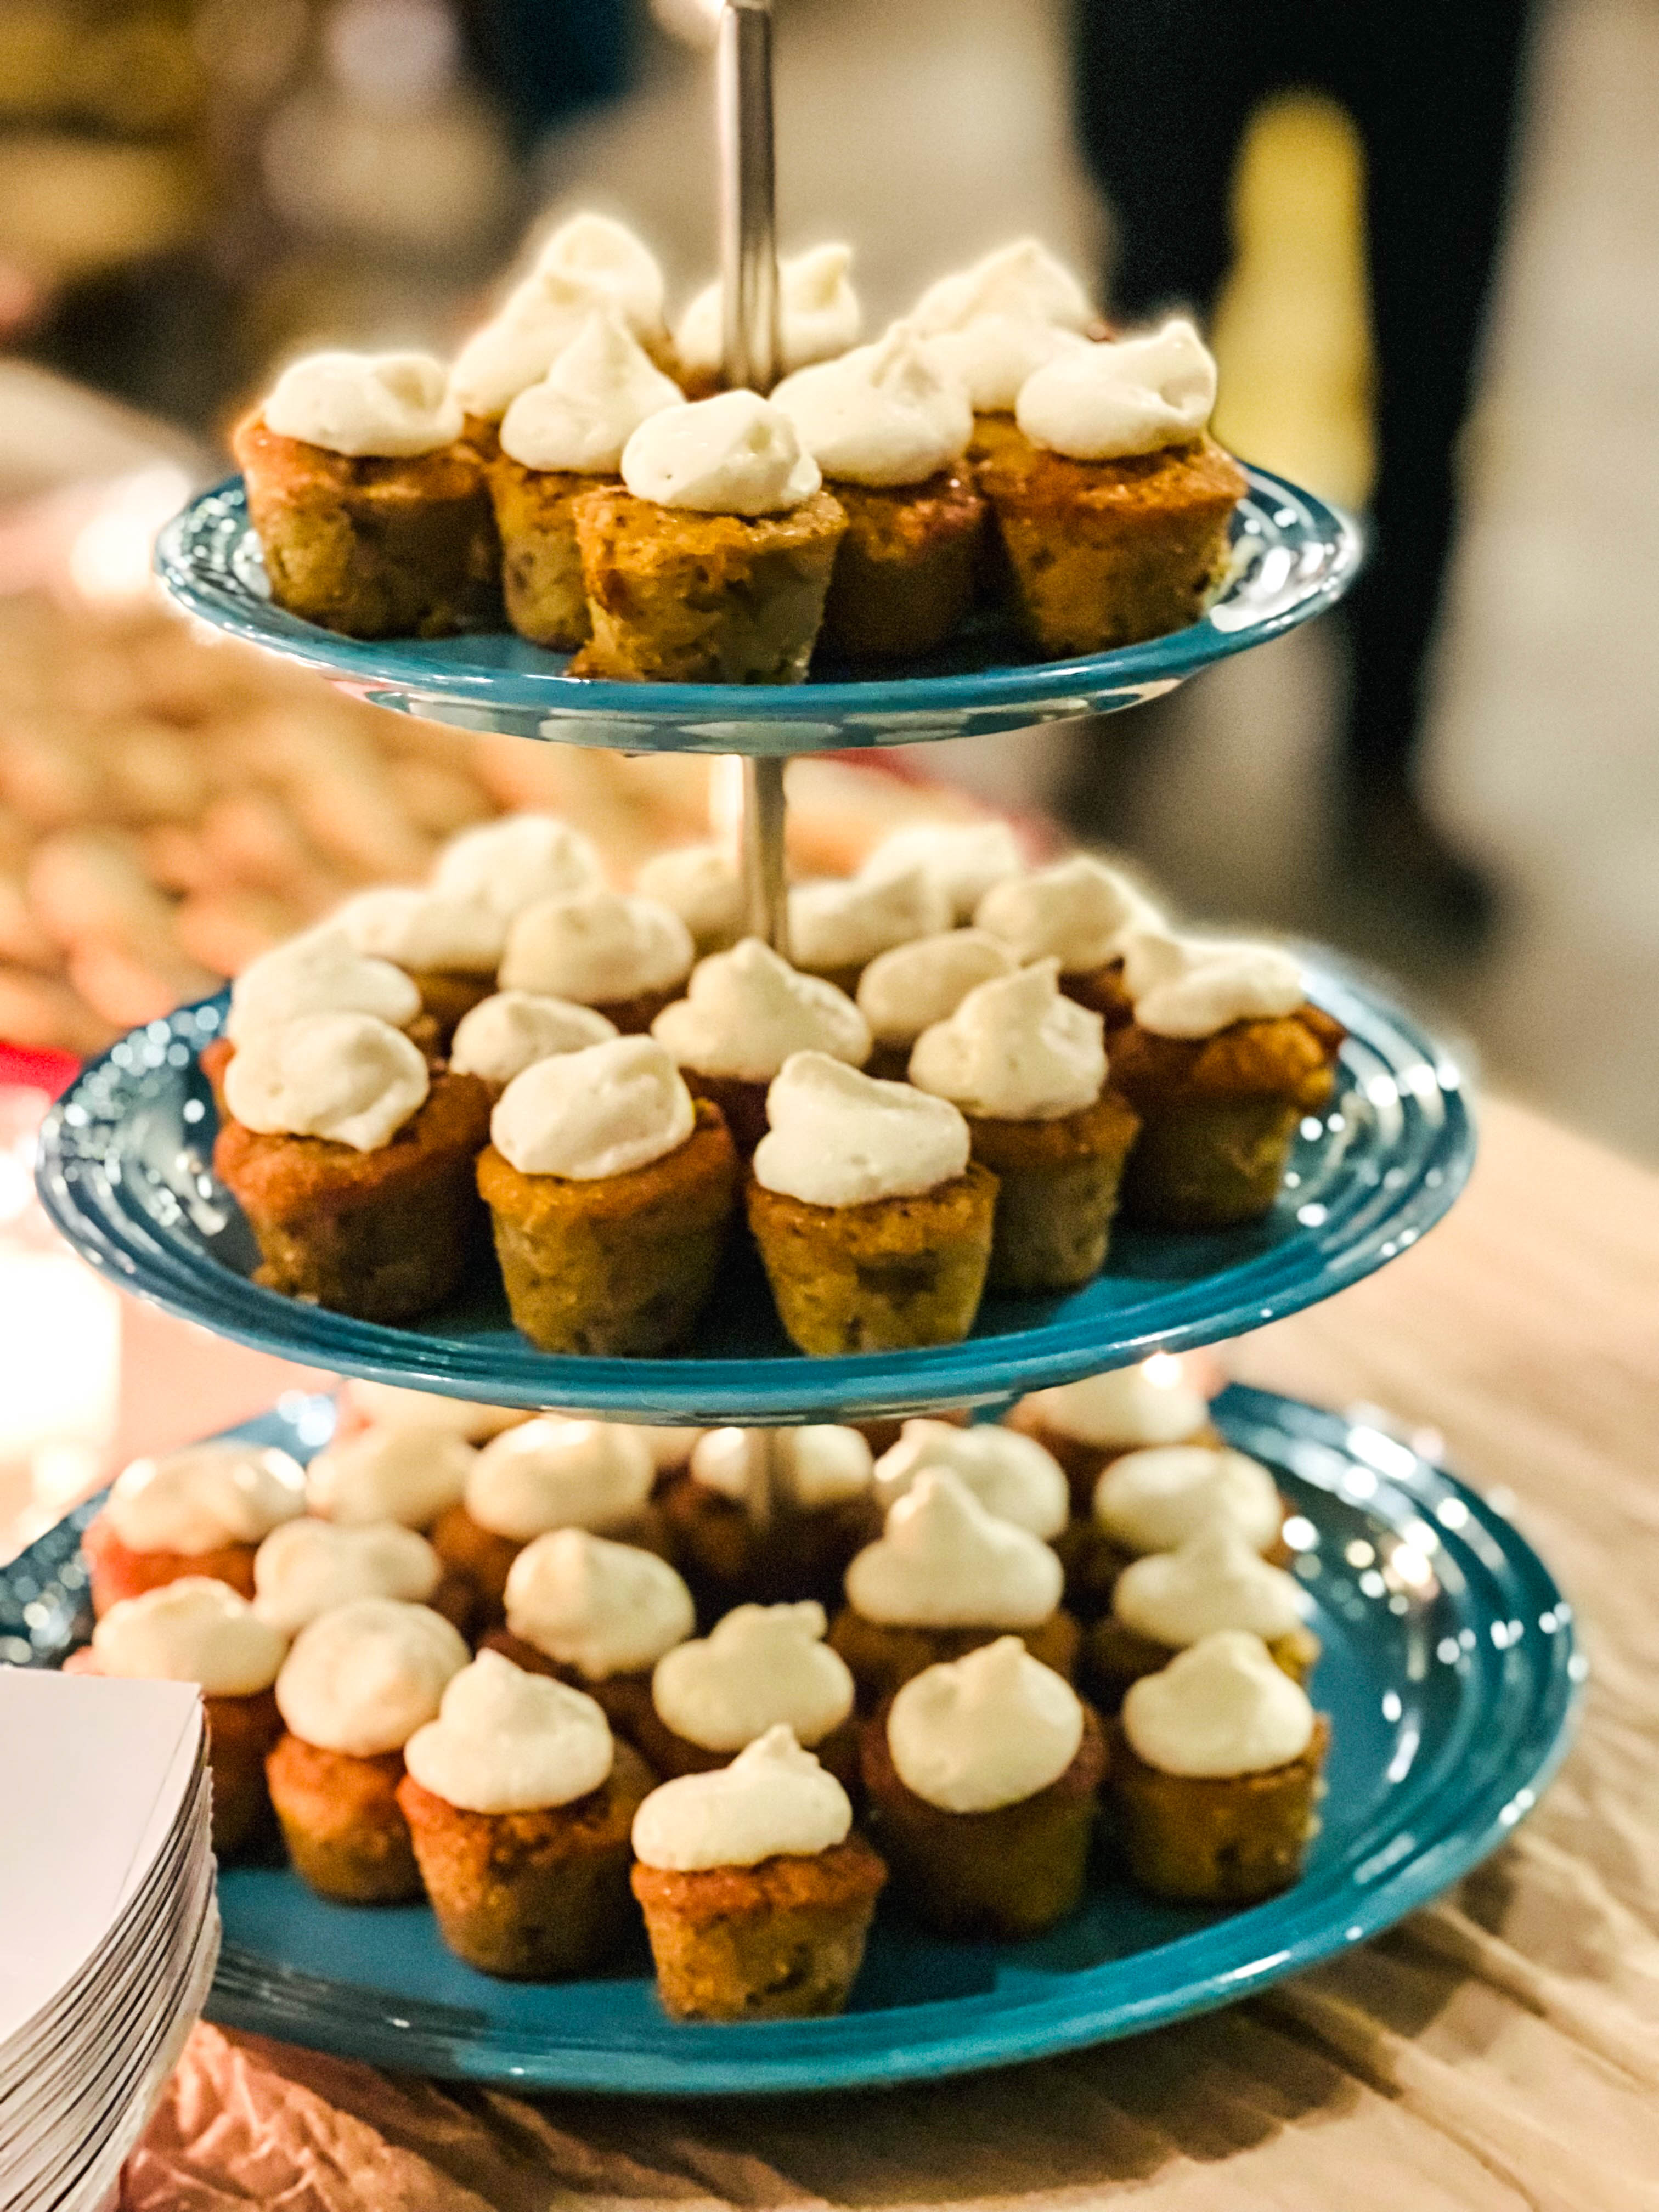 Carrot Cake Bites at Heritage Radio Network and Pay It Forward Charleston's Brighter Days Ahead campaign Kickoff Dinner at High Wire Distilling Co, in Charleston South Carolina